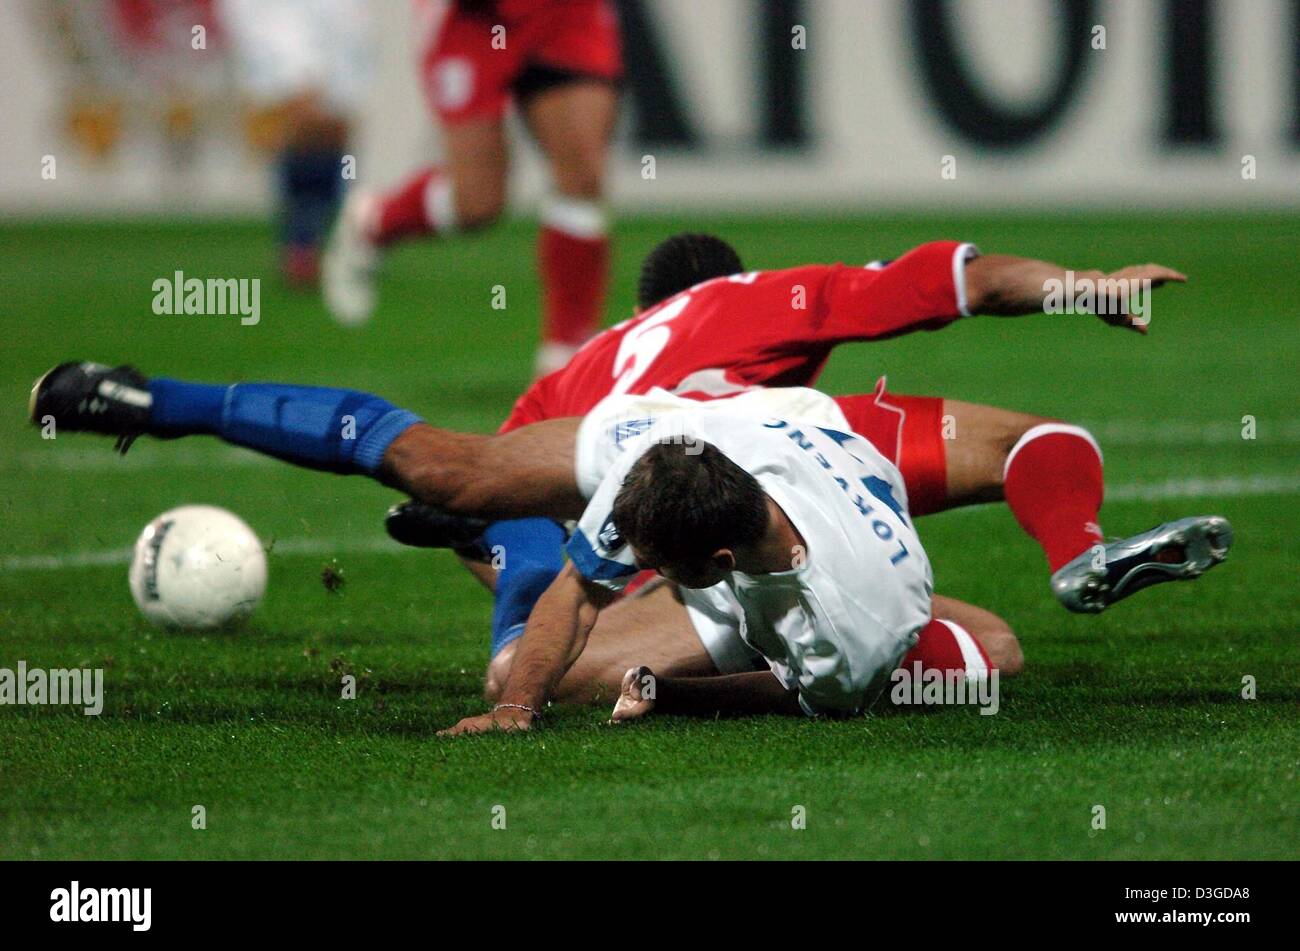 (dpa) - Bochum's player Vratislav Lokvence (front) and Liege's player Onyewu Oguchi struggle for the ball during the first round UEFA Cup match opposing German Vfl Bochum and Belgian Standard Liege, in Bochum, Germany, 30 September 2004. Stock Photo